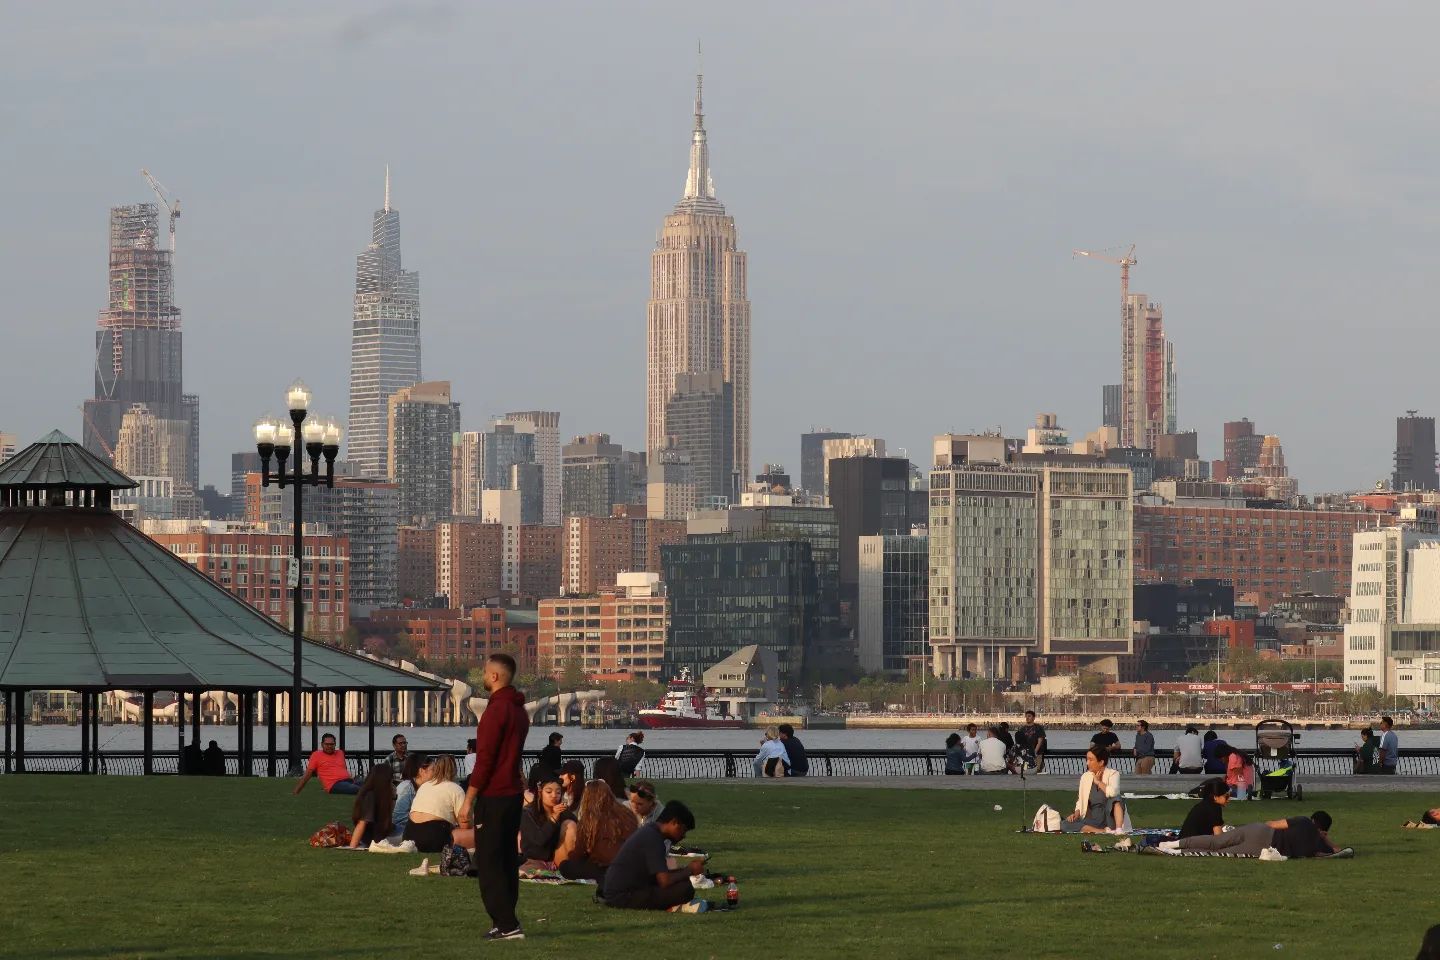 A view of the NYC Skyline from a park